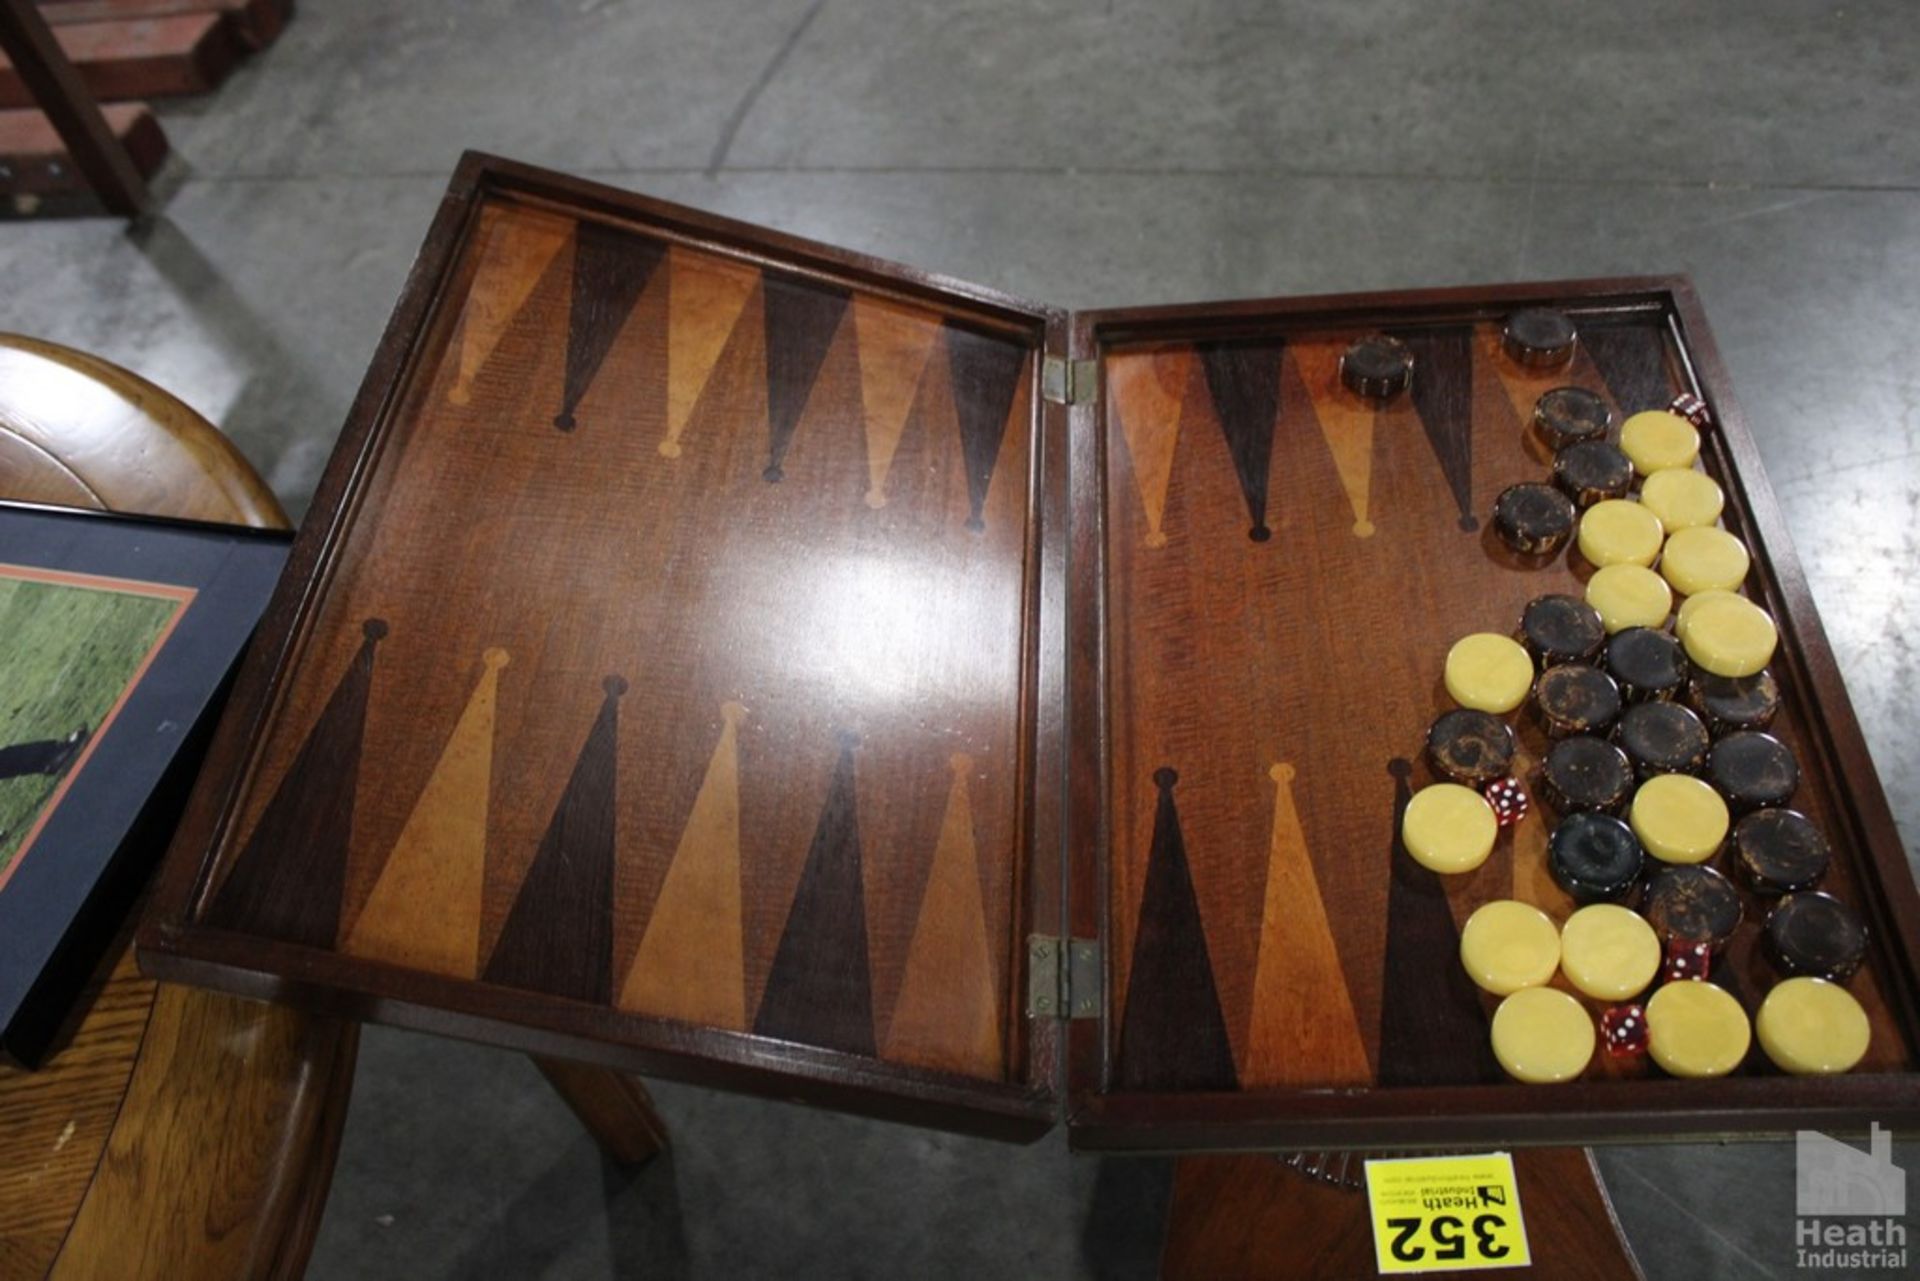 PEDESTAL TABLE WITH CHECKER BOARD AND BACKGAMMON BOARD INSIDE - Image 3 of 3